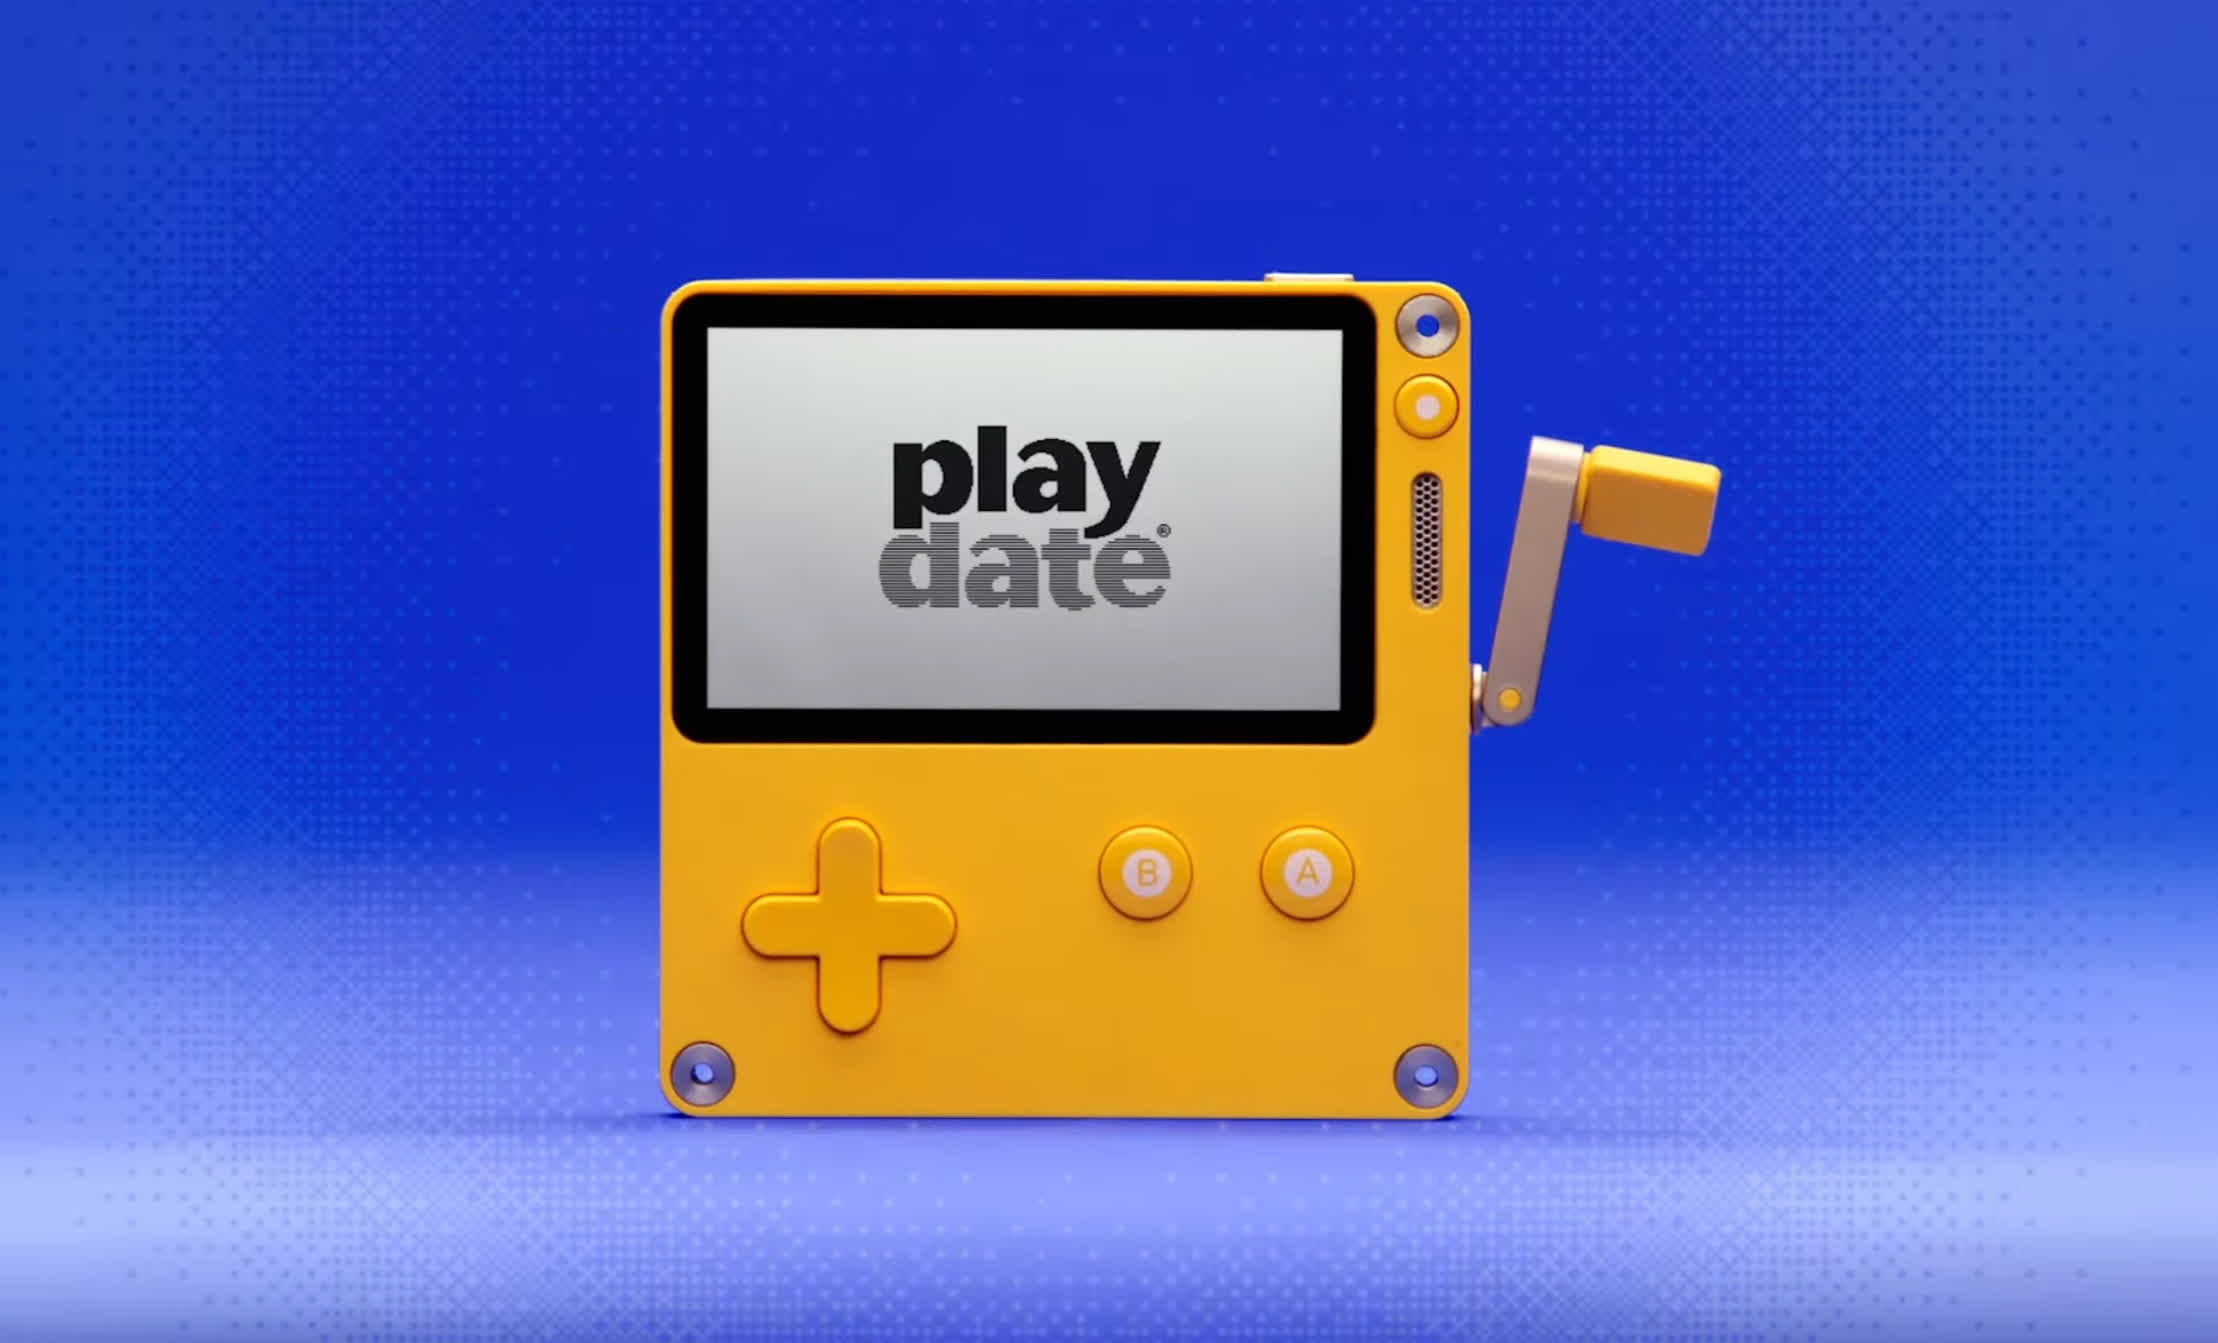 Panic sells its initial batch of 20,000 Playdate handhelds in under 20 minutes